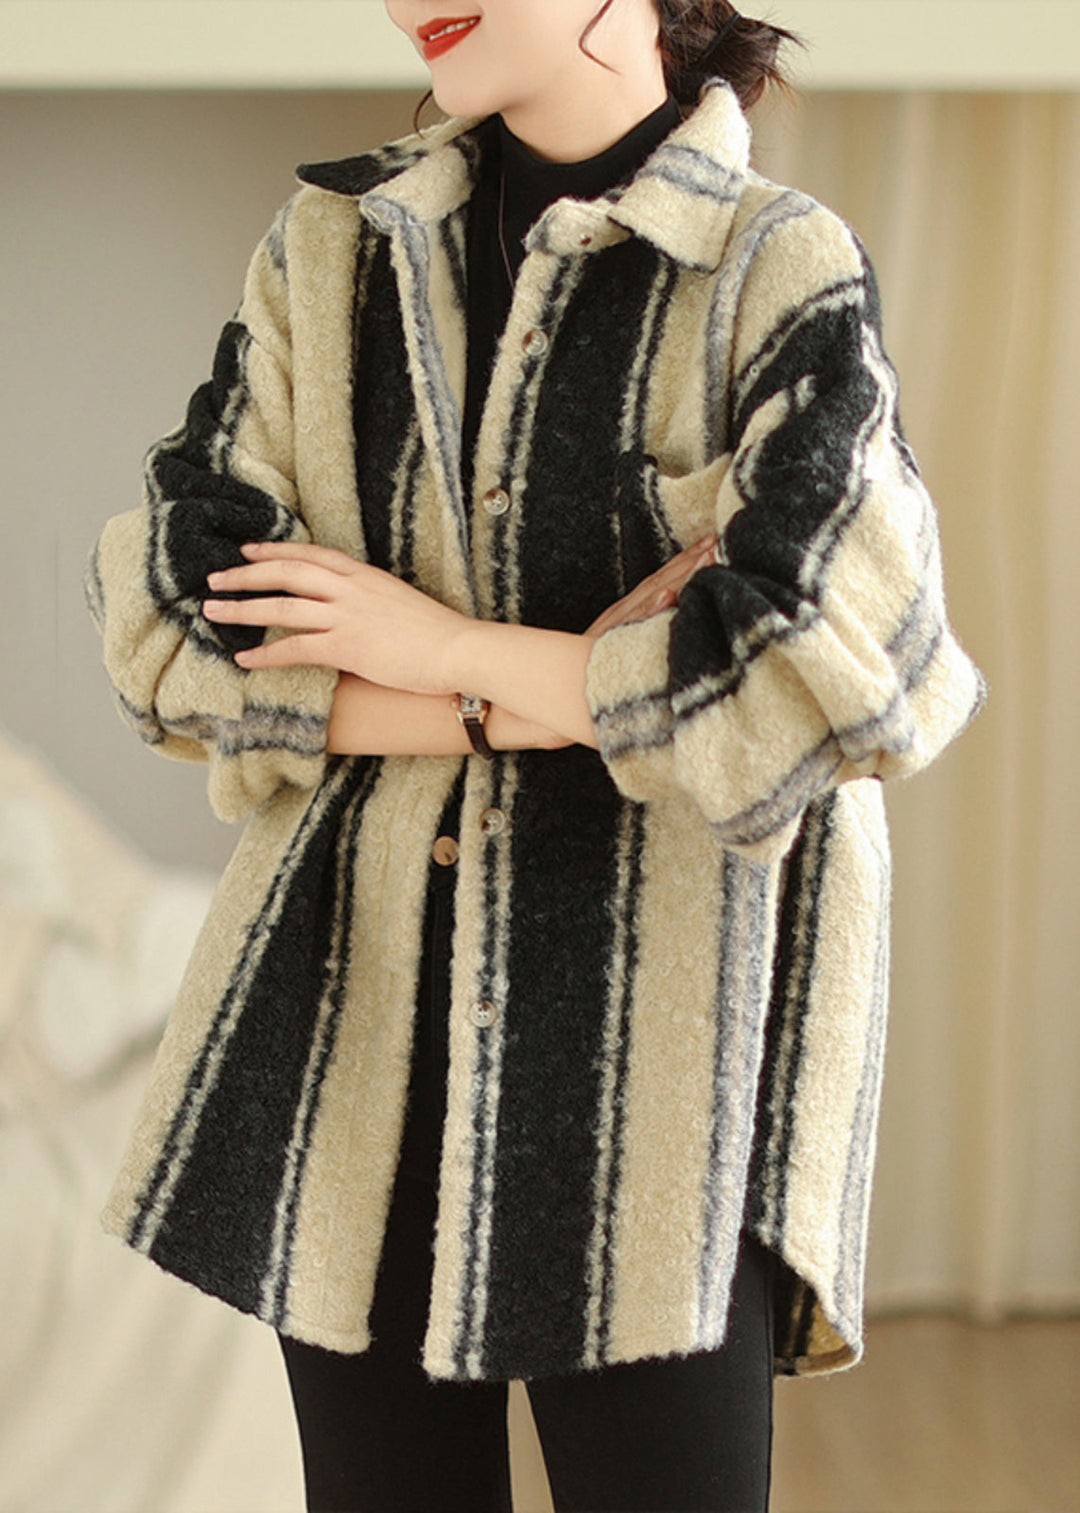 French Striped Peter Pan Collar Button Woolen Coat Long Sleeve